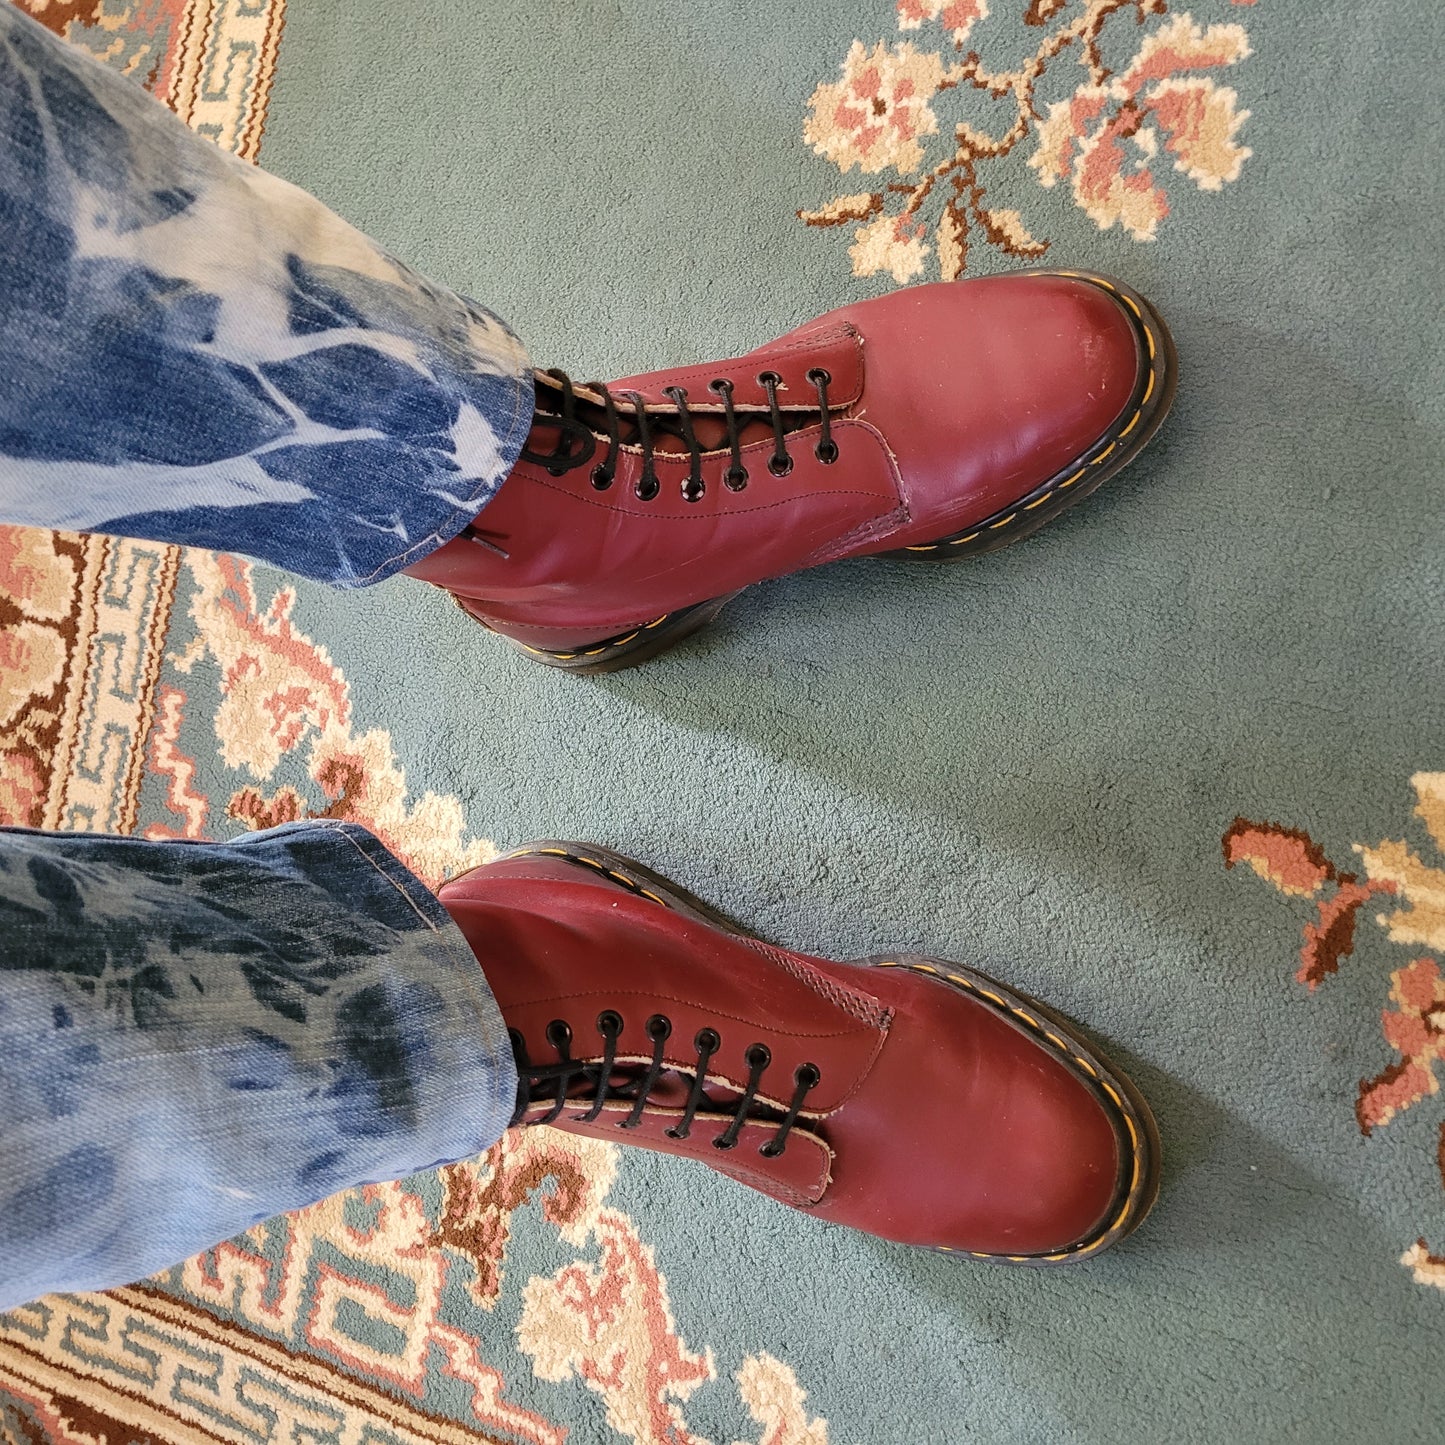 Brand new cherry red Dr Martens 10 holes made in England 90's